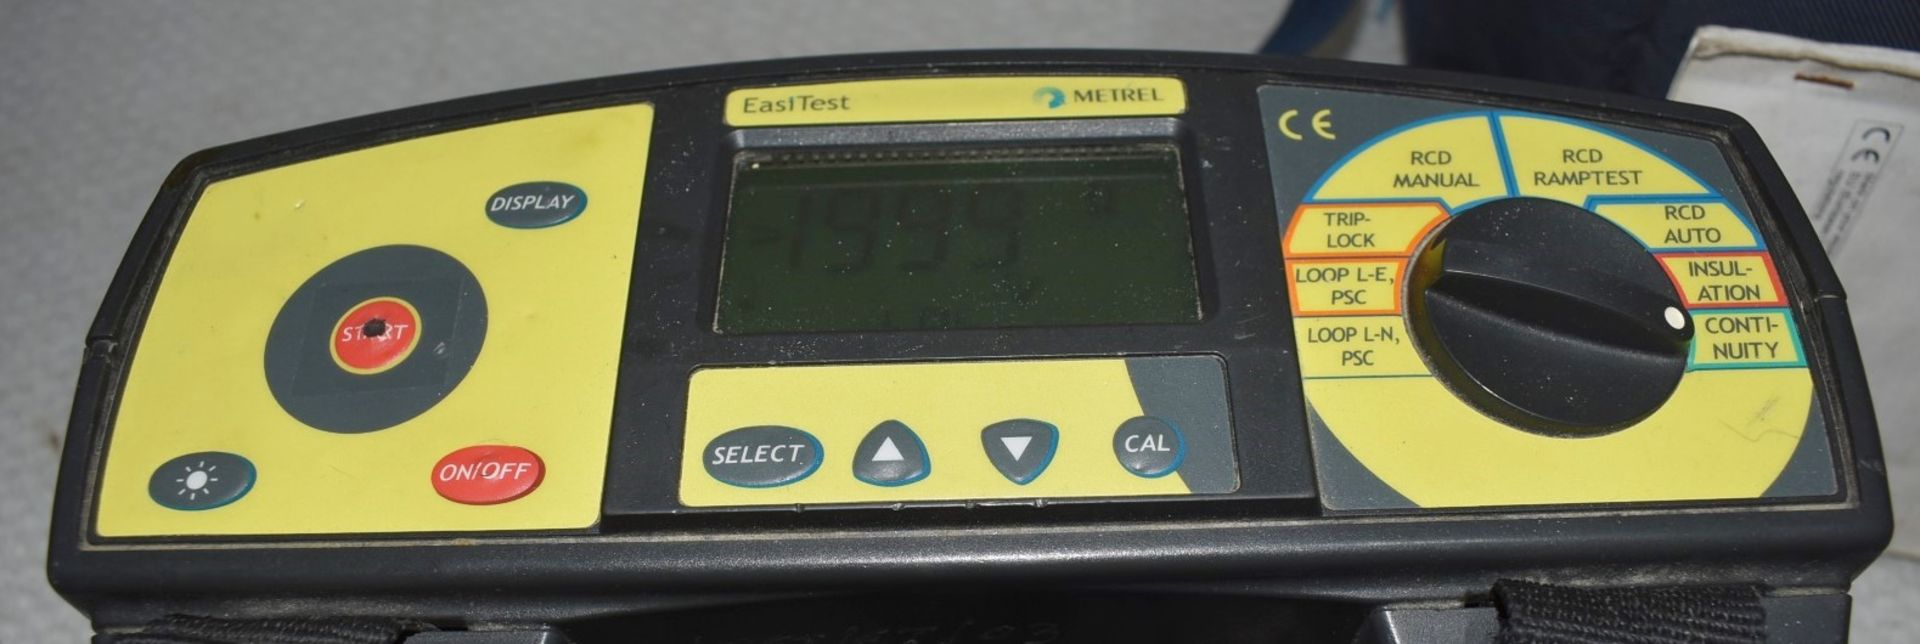 1 x METREL Easitest Multifunctional Portable Electrical Tester With Carry Case - Ref: DS7500 ALT - - Image 5 of 8